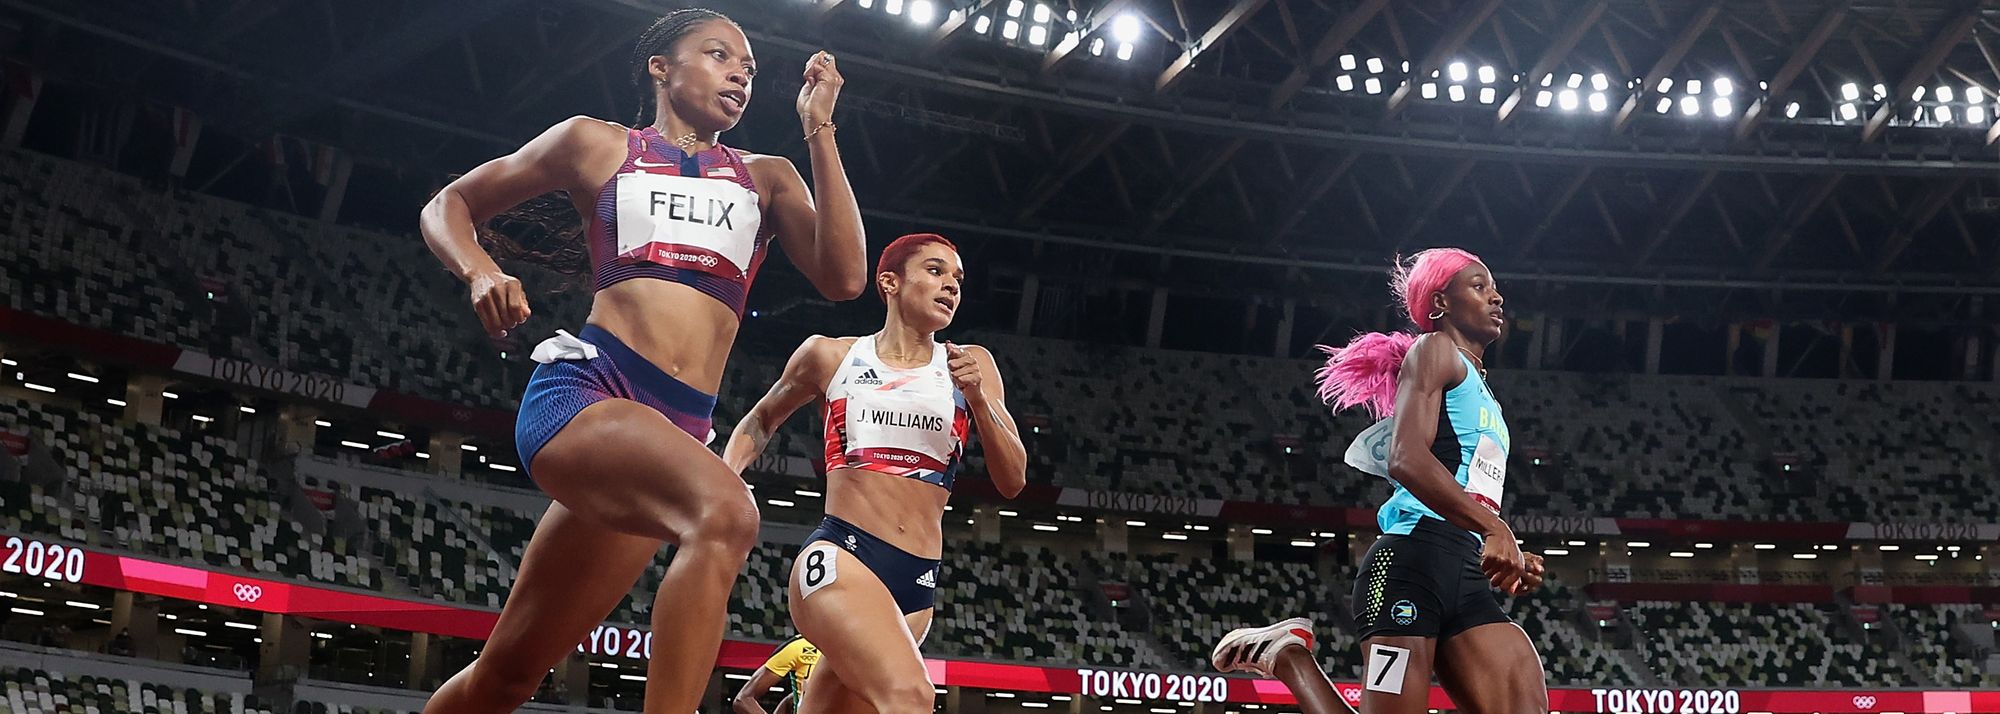 World athletics championships 2023 tickets to go on sale on 12 december